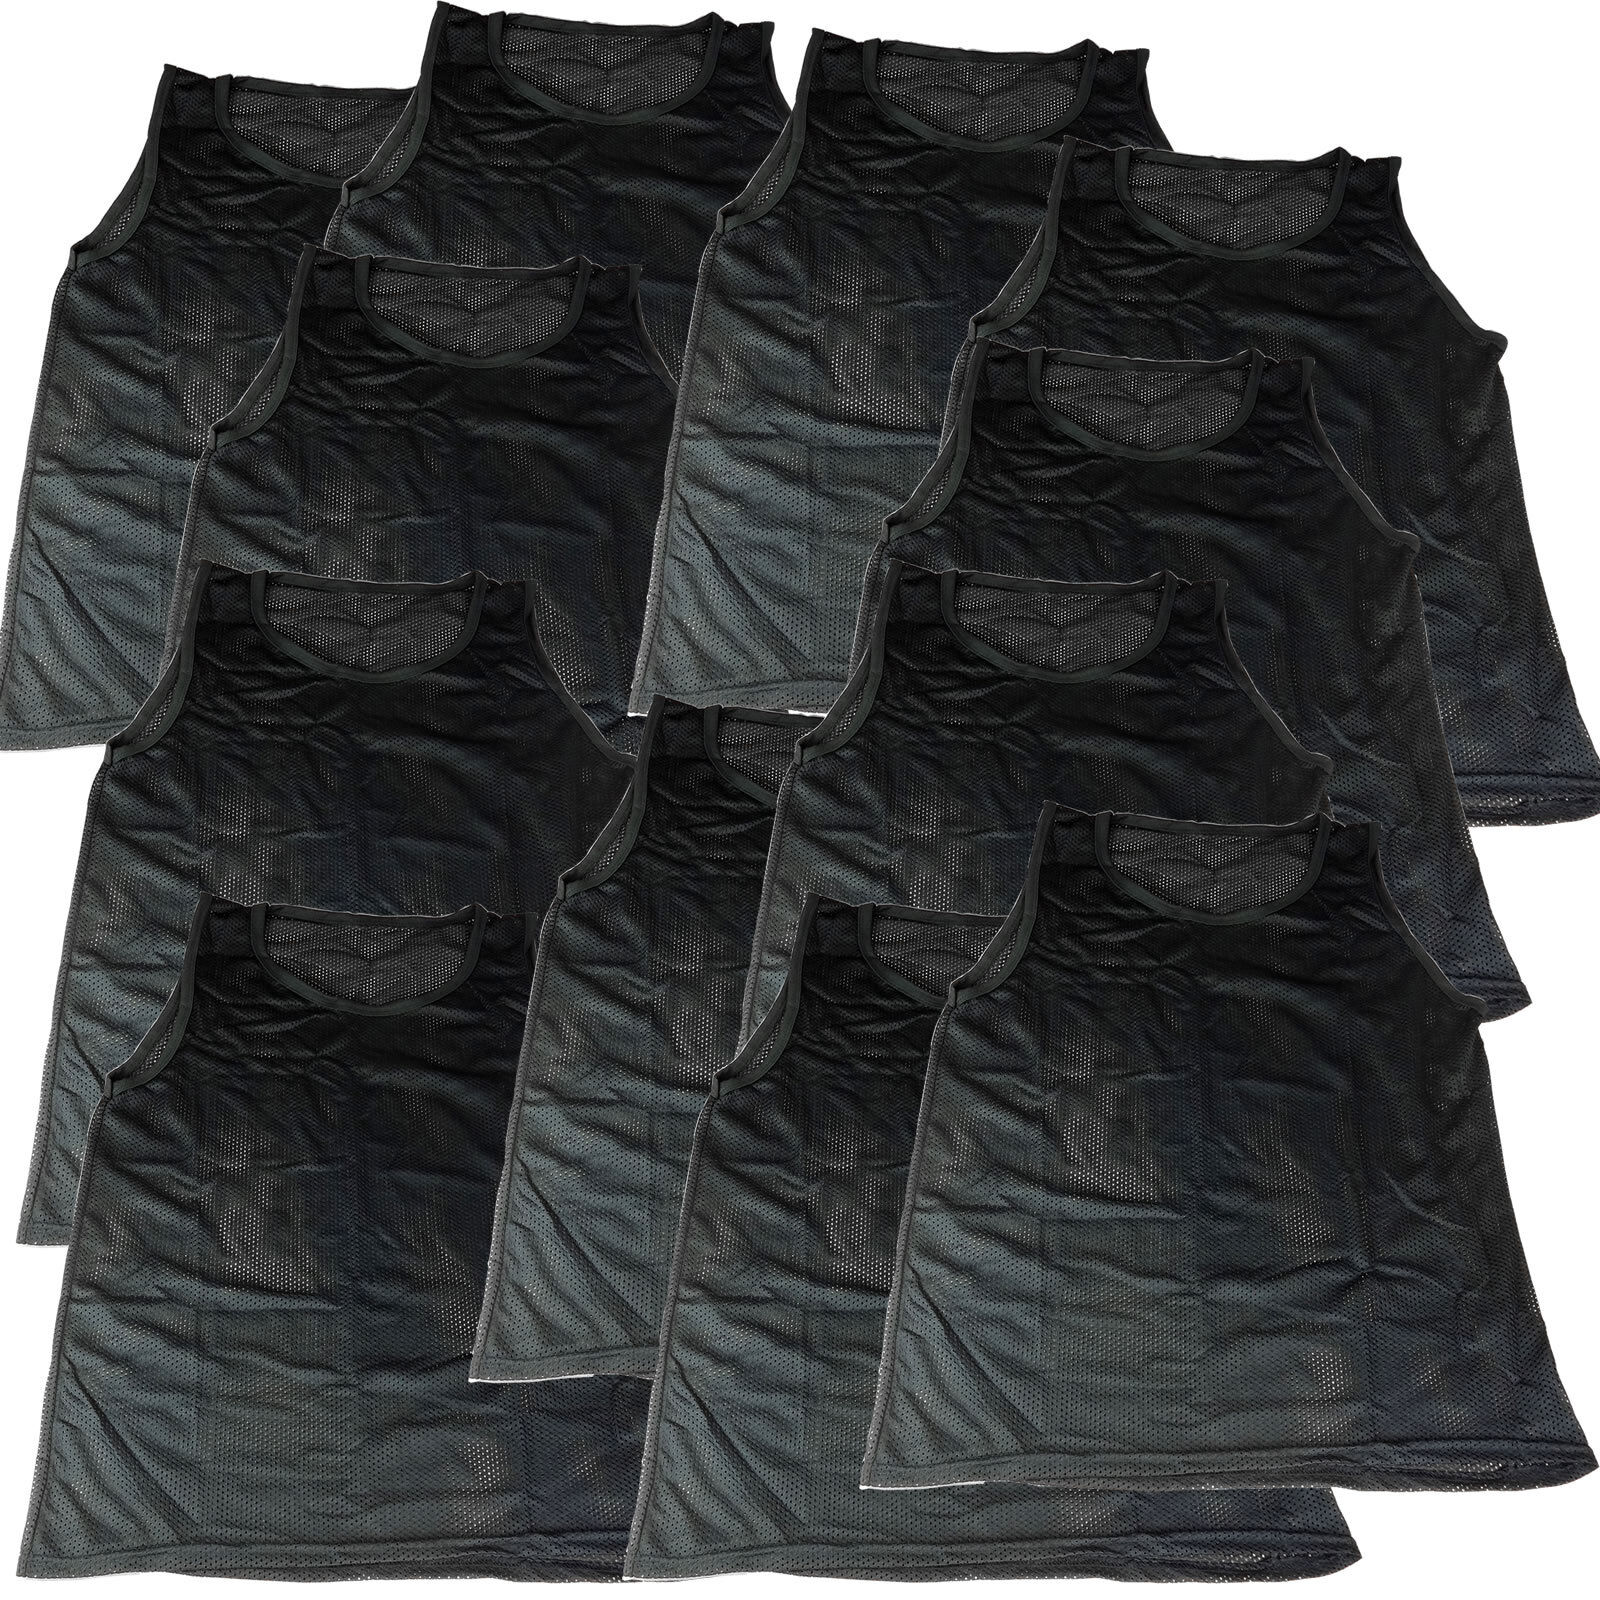 Great Choice Products (12) Black Scrimmage Vests Pinnies Soccer, Softball, Track & Field Youth